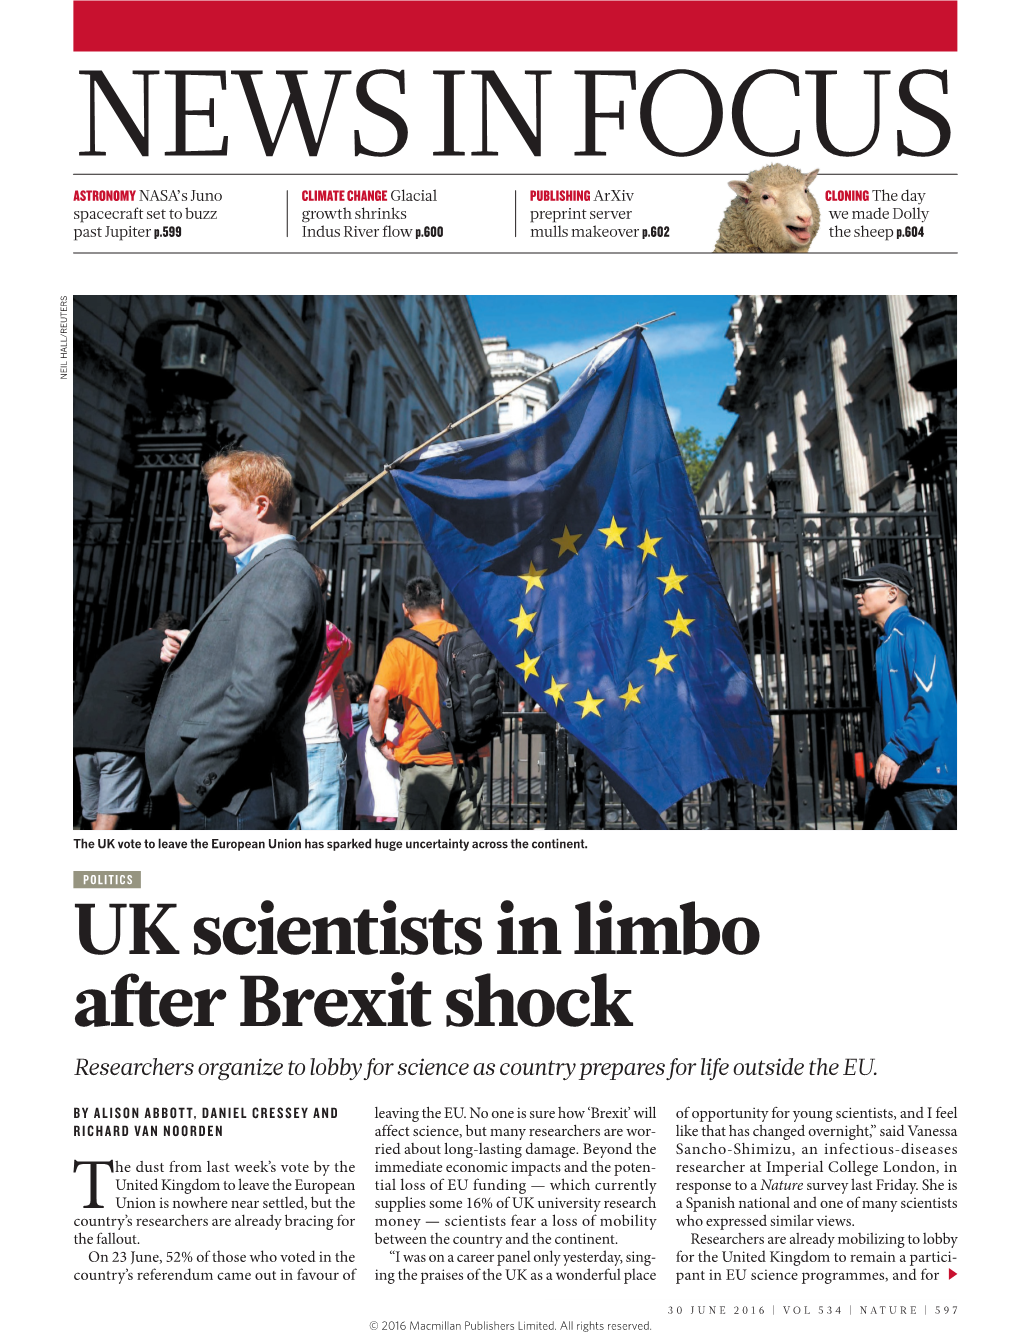 UK Scientists in Limbo After Brexit Shock Researchers Organize to Lobby for Science As Country Prepares for Life Outside the EU